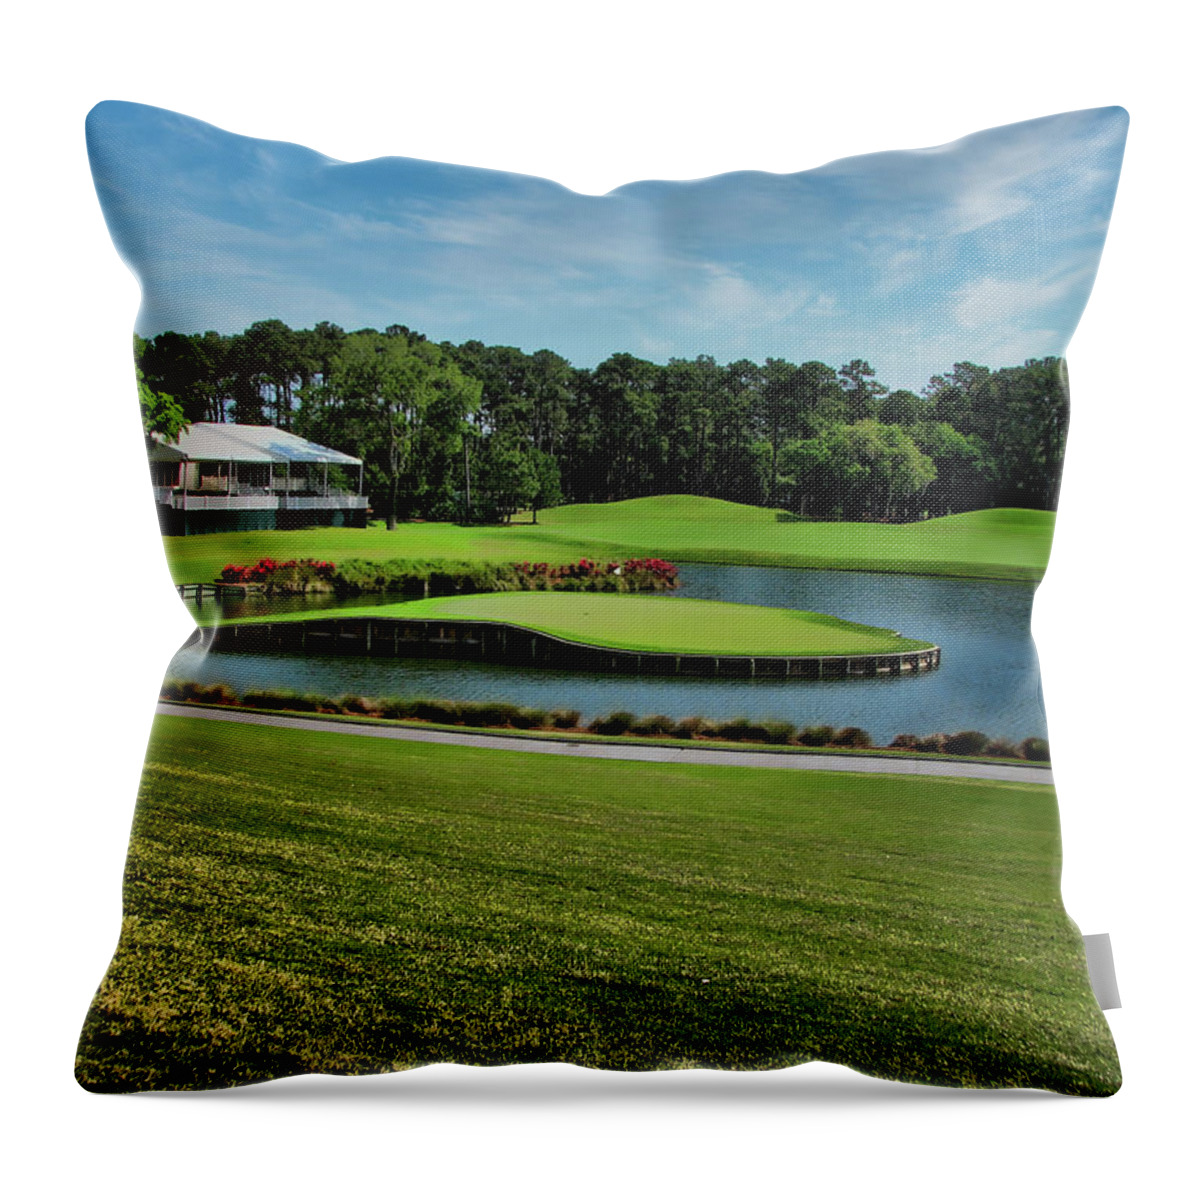 Sawgrass Throw Pillow featuring the photograph Island Green by Judy Vincent